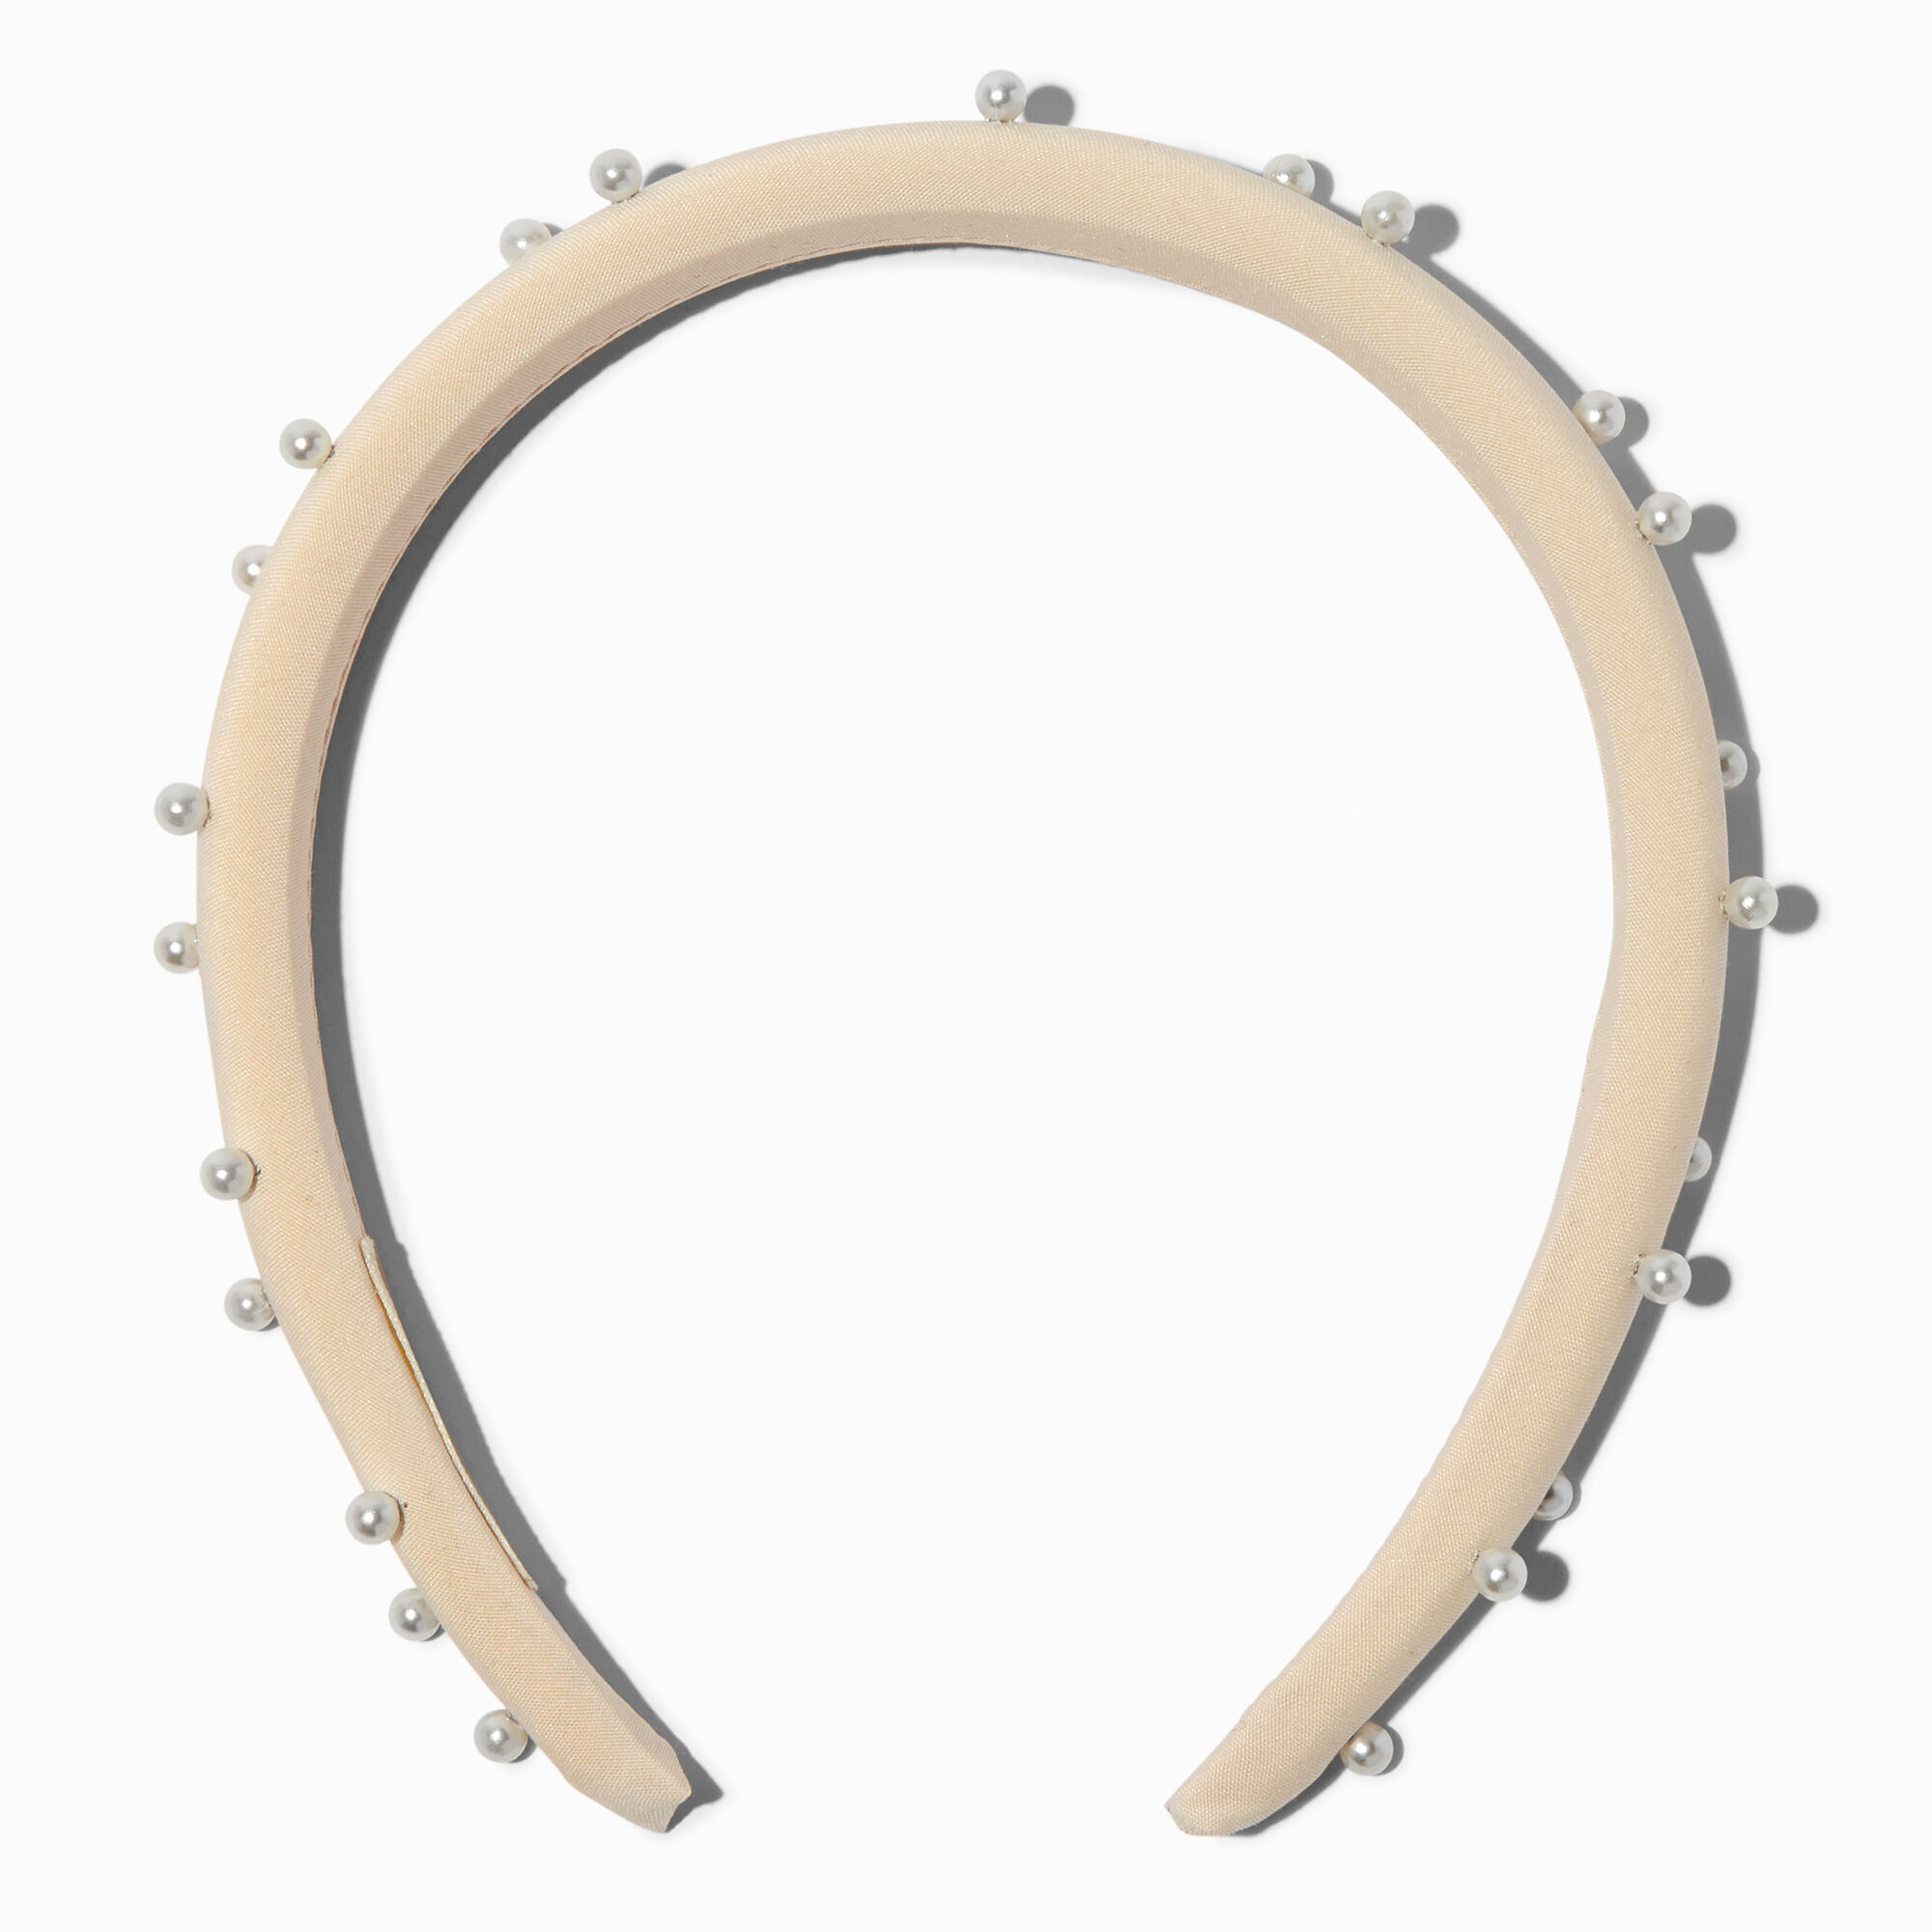 View Claires PearlStudded Headband Ivory information